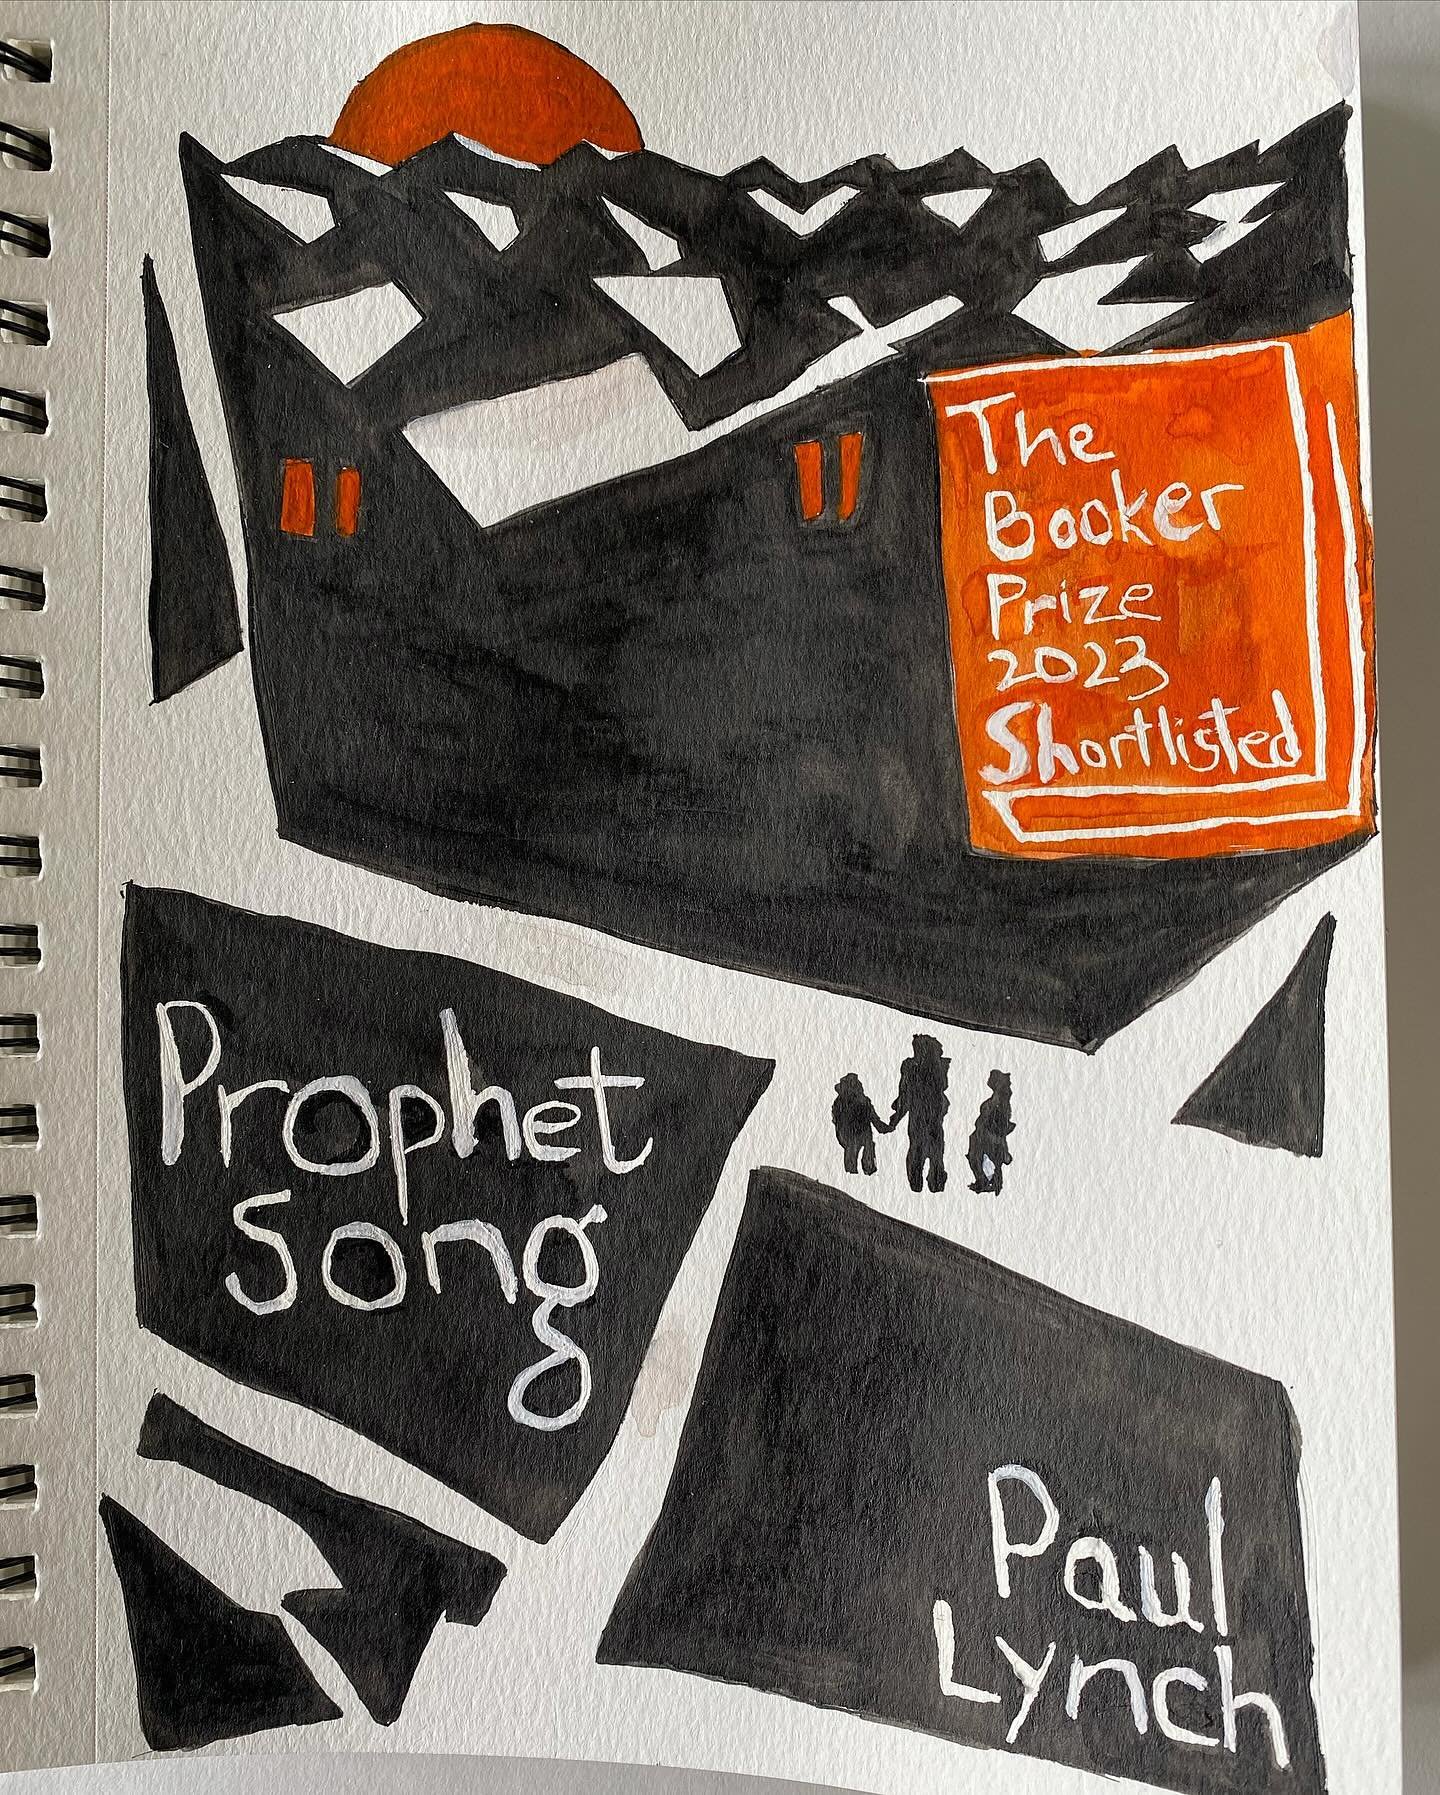 Not the prettiest of book covers but you know what they say about judging a book by its cover. The other day in my local library I picked up a random book from the new arrivals section: &ldquo;Prophet Song&rdquo; by Paul Lynch. I thought it was as go